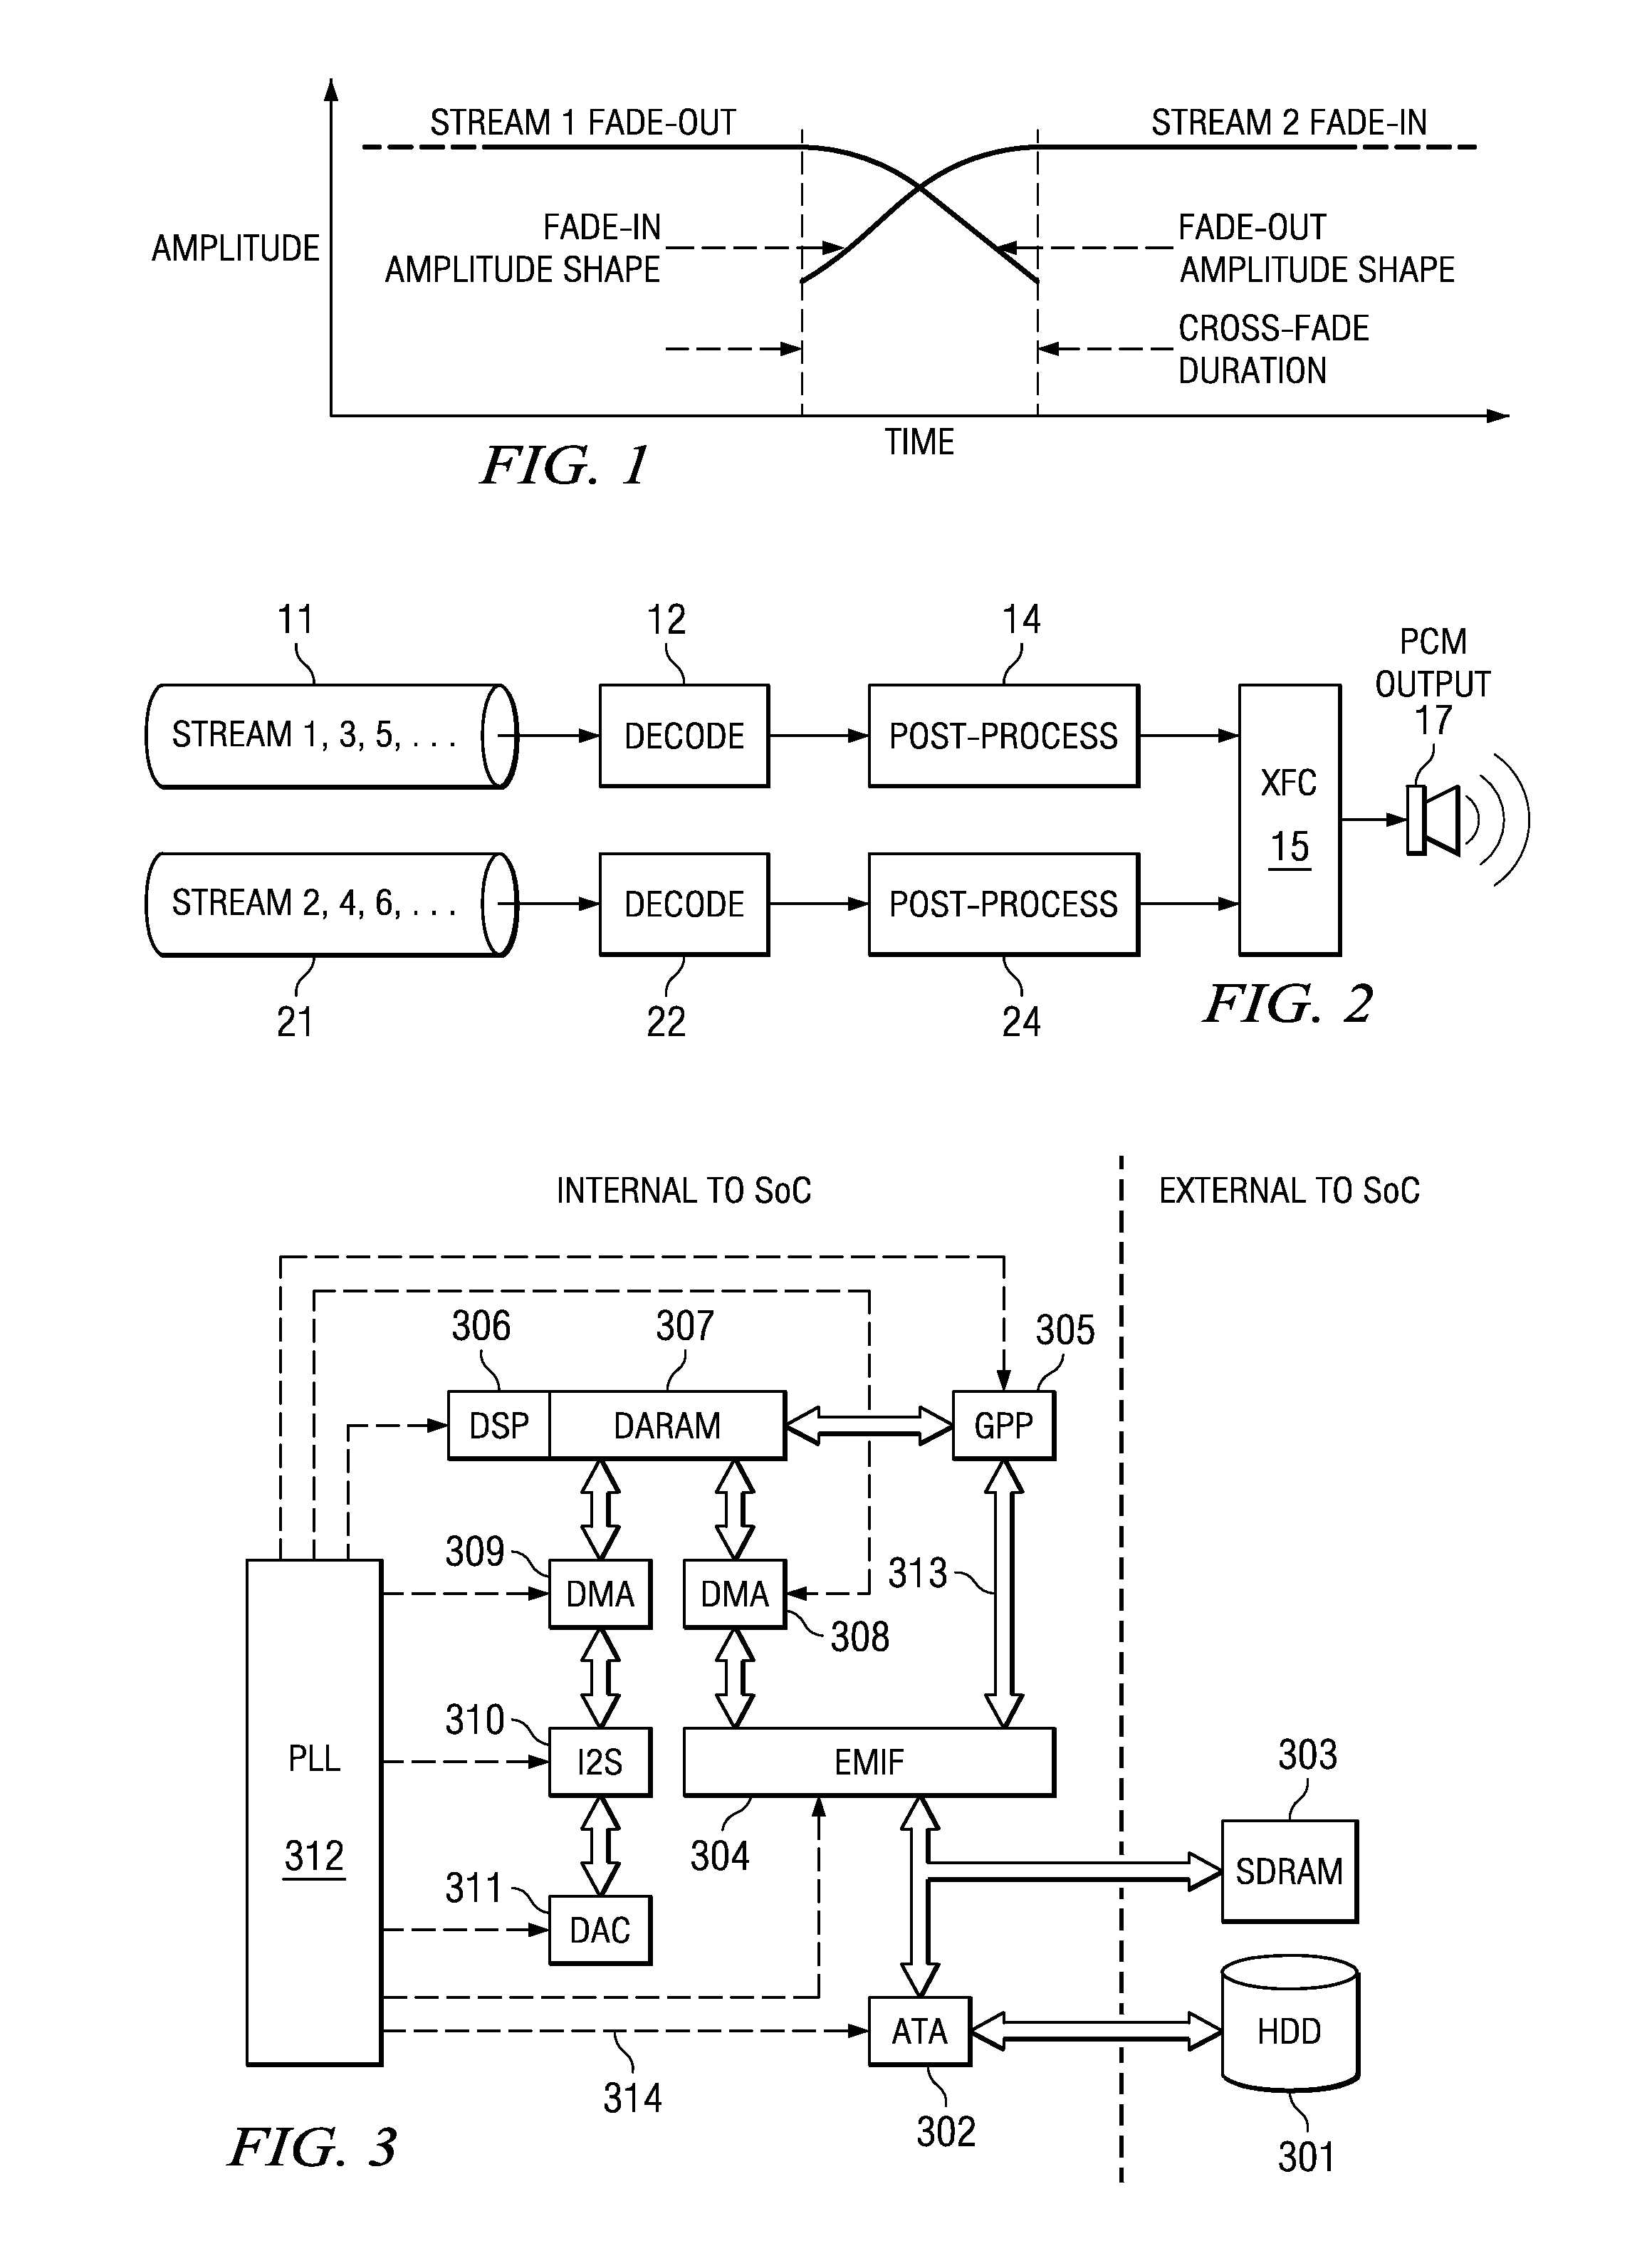 Apparatus and method for coupling two independent audio streams